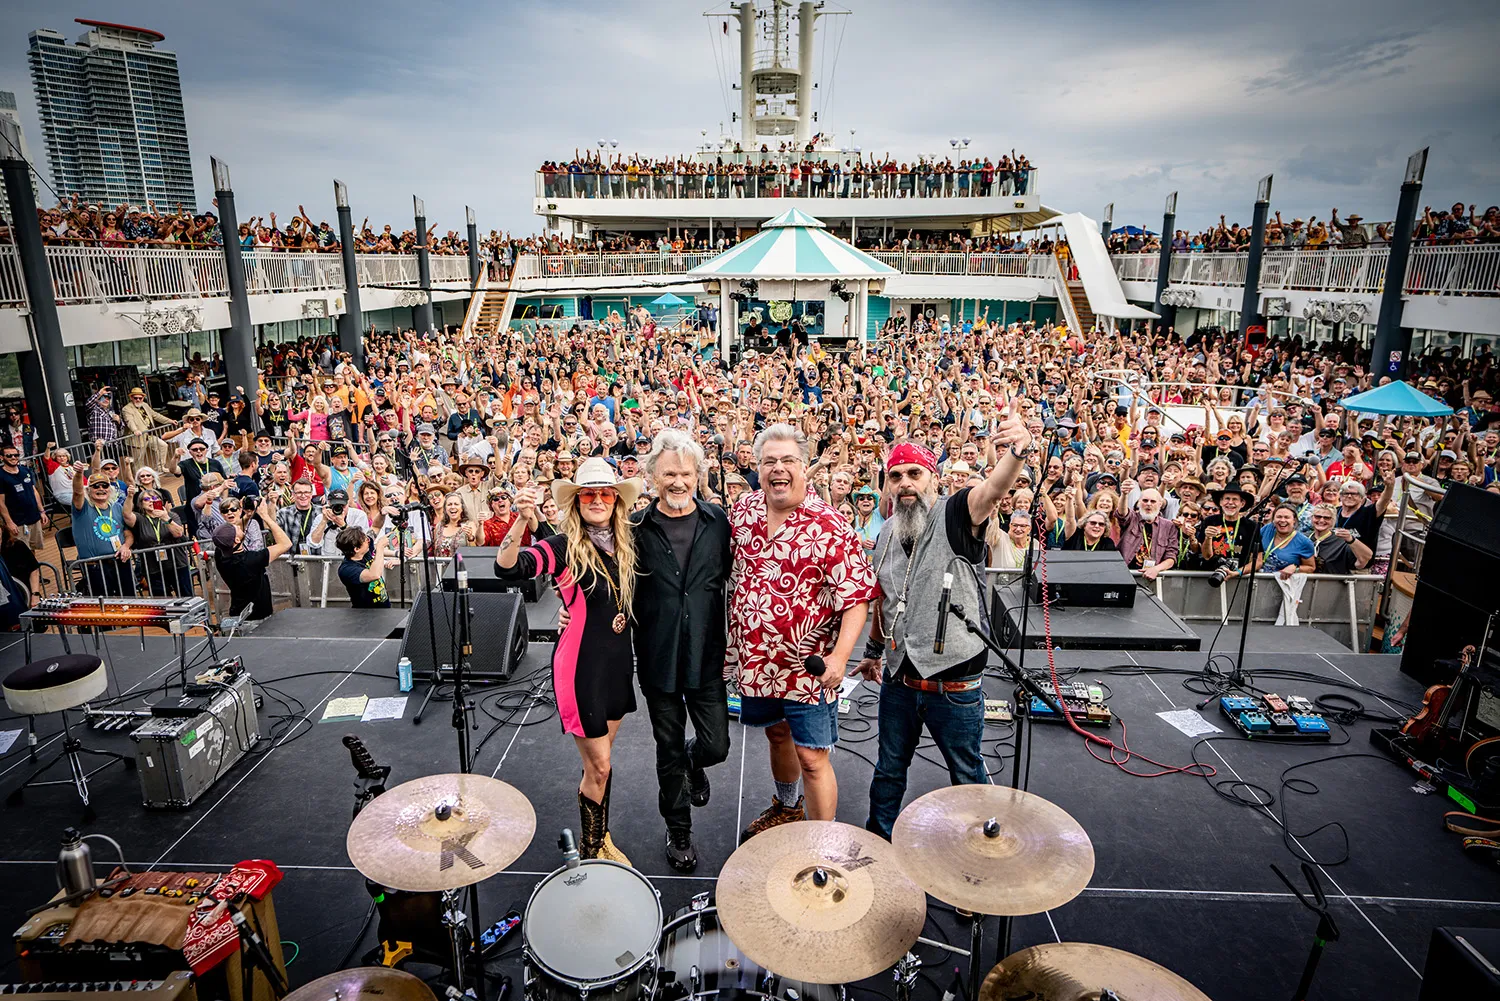 music cruises have caught major wind